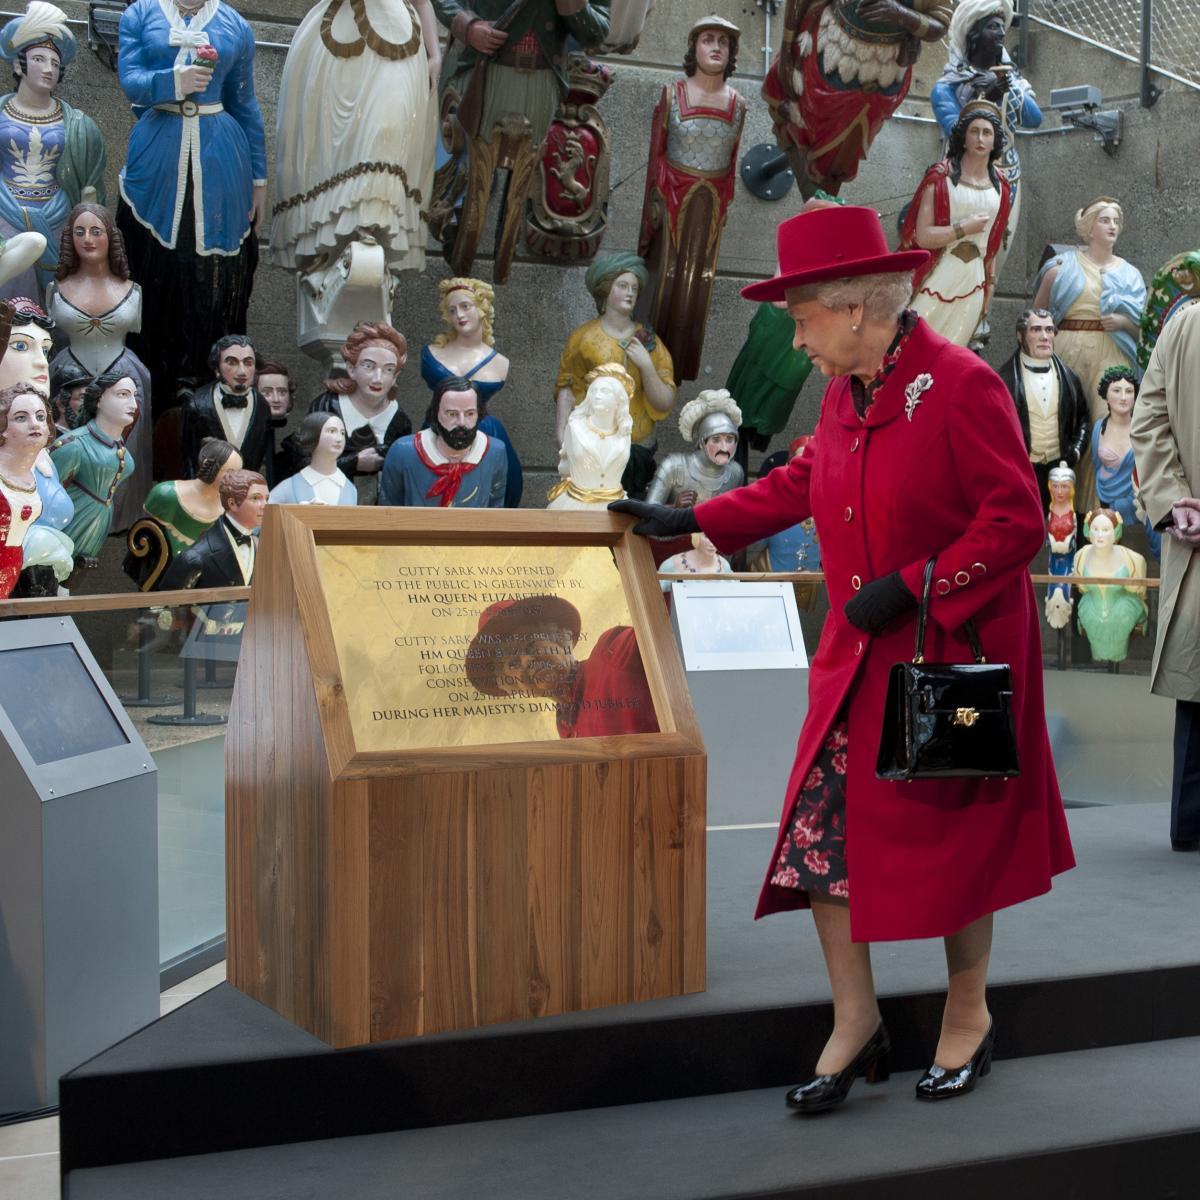 The Queen reopening Cutty Sark